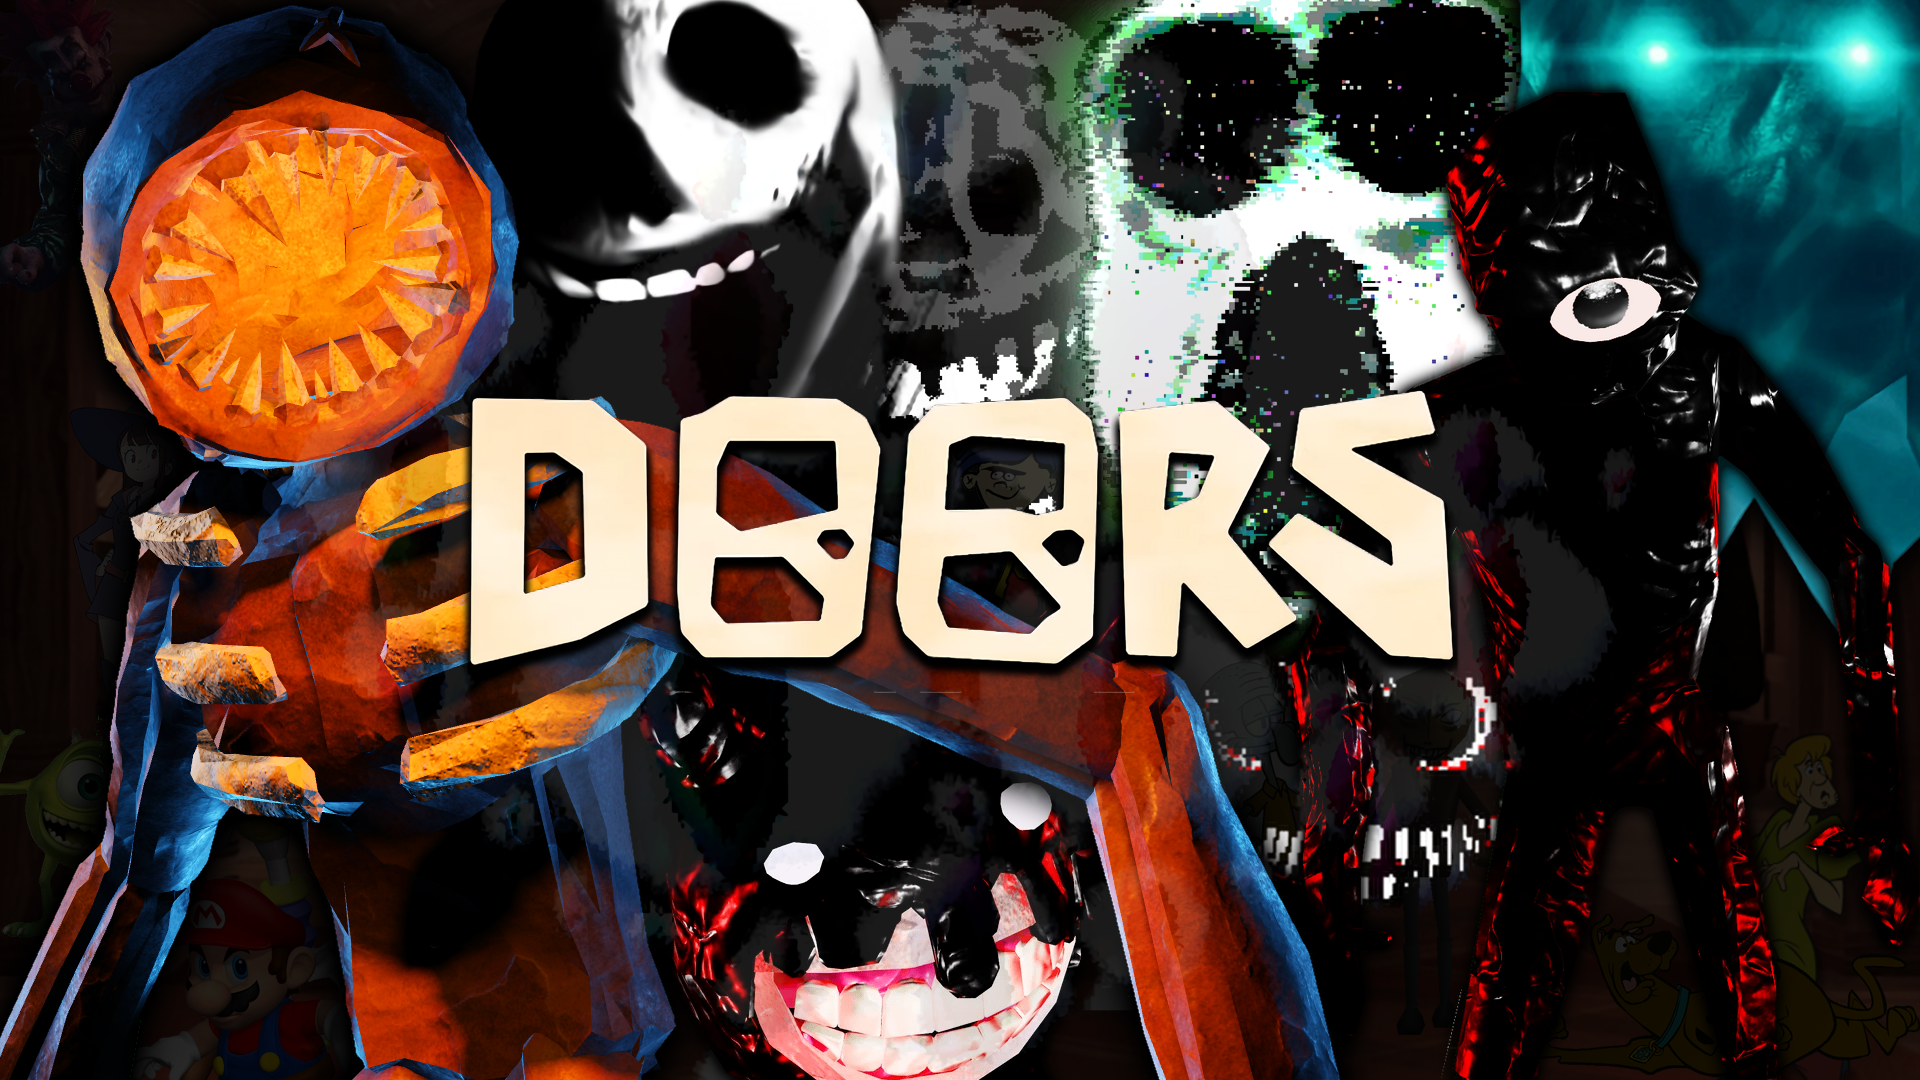 D O O R S by TIYFP on Newgrounds